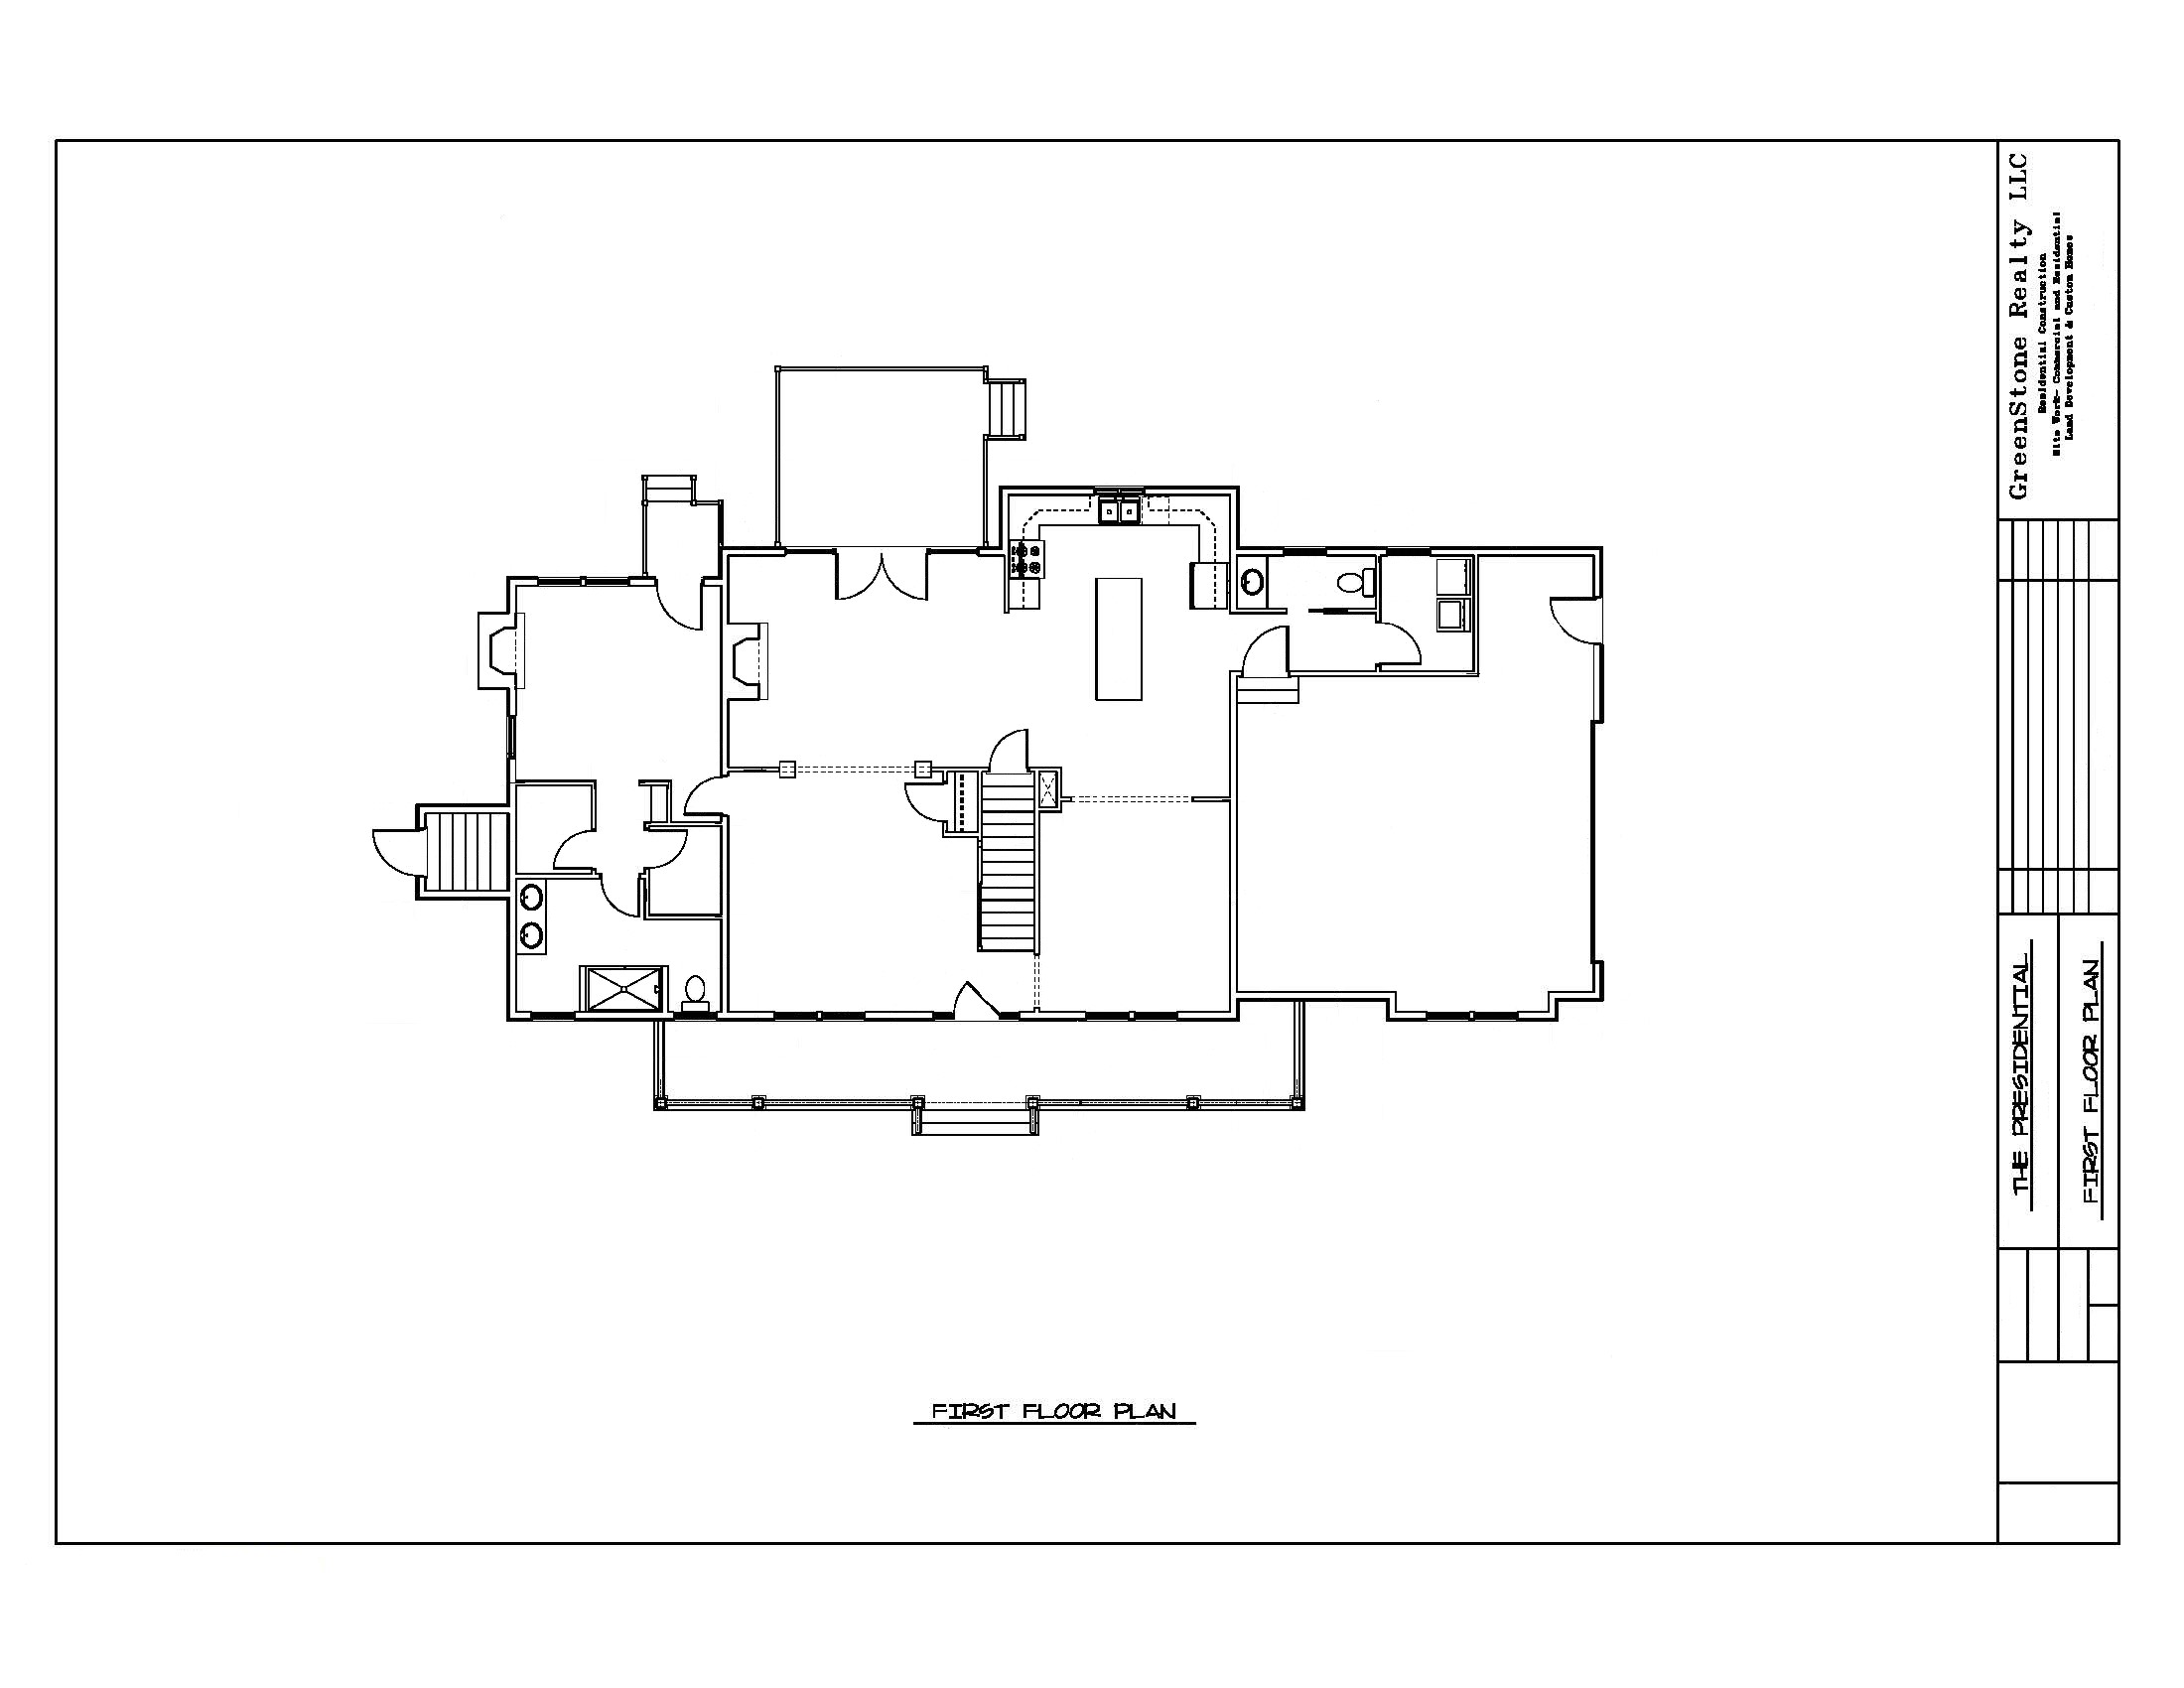 The Presidential First Floor Plan